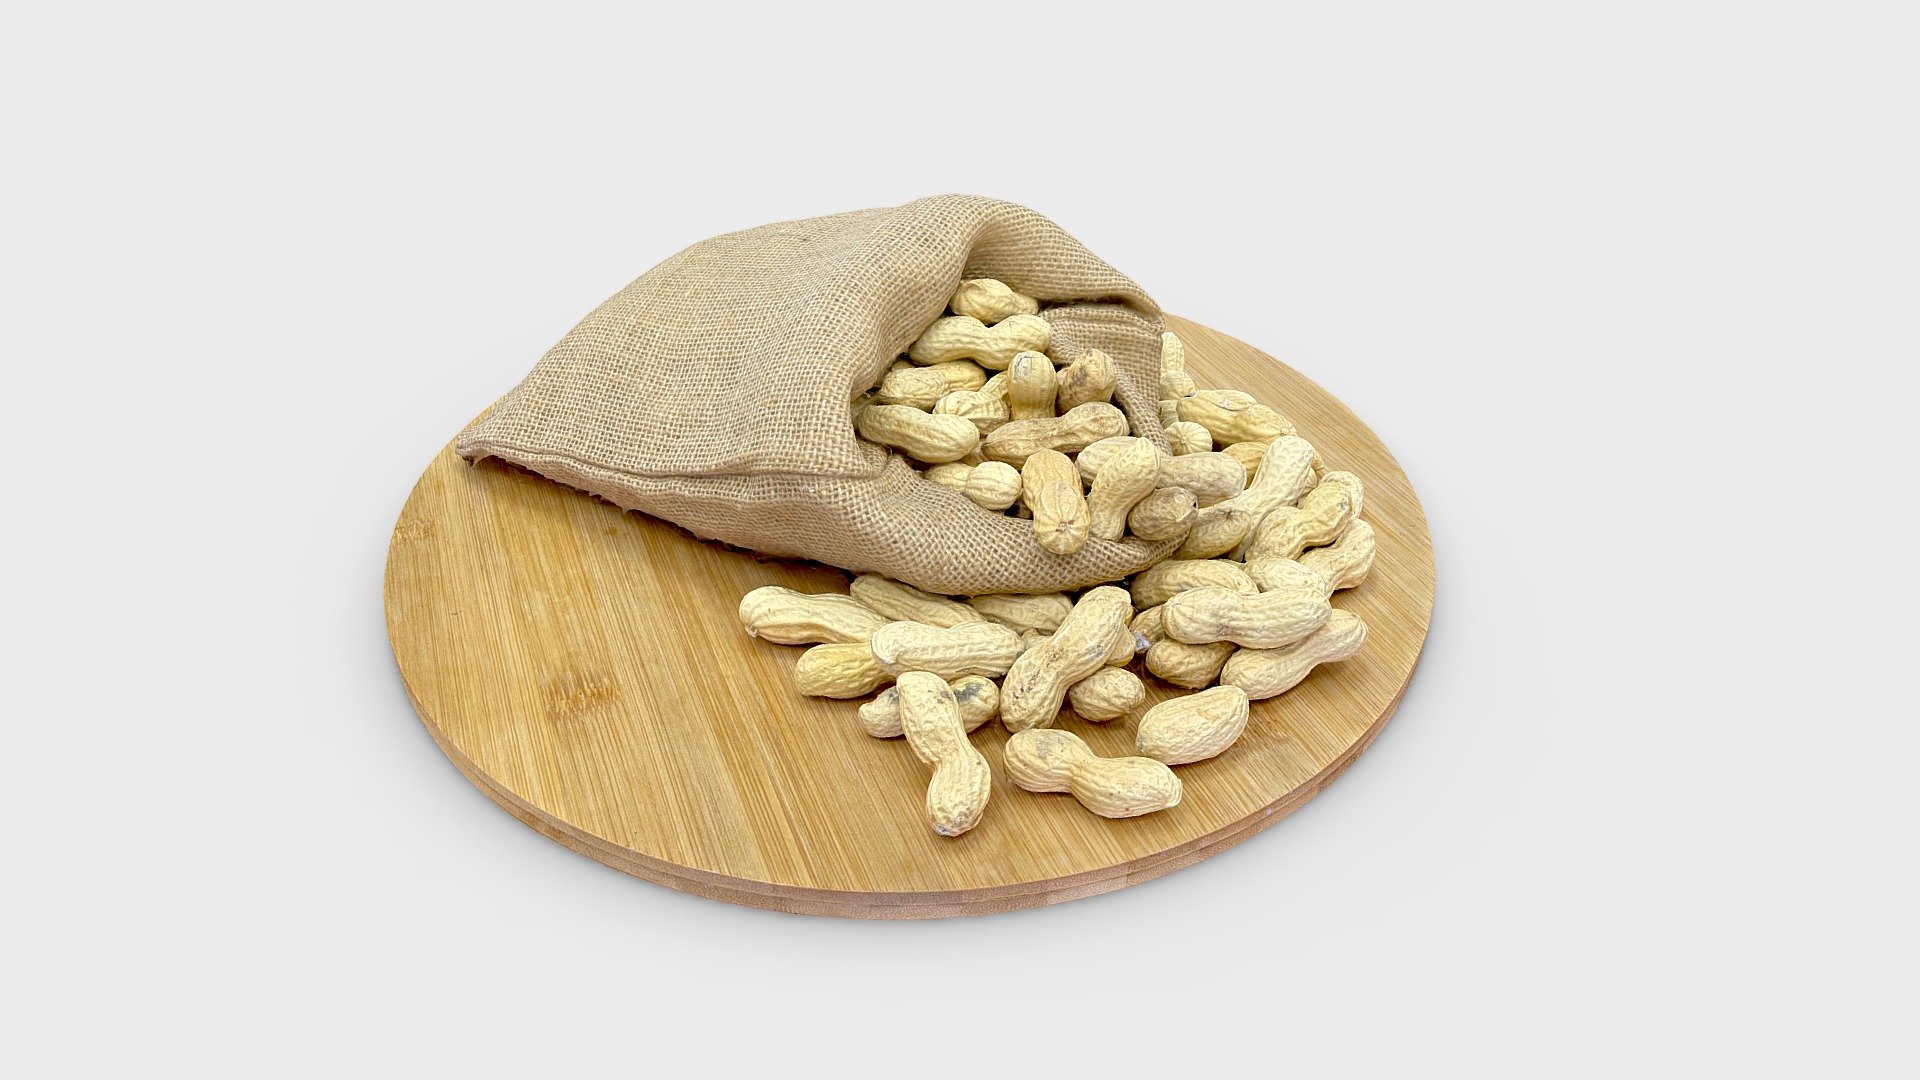 Peanuts is a very basic snack. Whole eyes are best because it's not boring

more info:




View my Food Metaverse/AR/VR on. Zoltanfood

Take a seat in my  Virtual Bistro and visit World Food Gallery

Support me on. Patreon
 - A bag of peanuts - 3D model by Zoltanfood 3d model